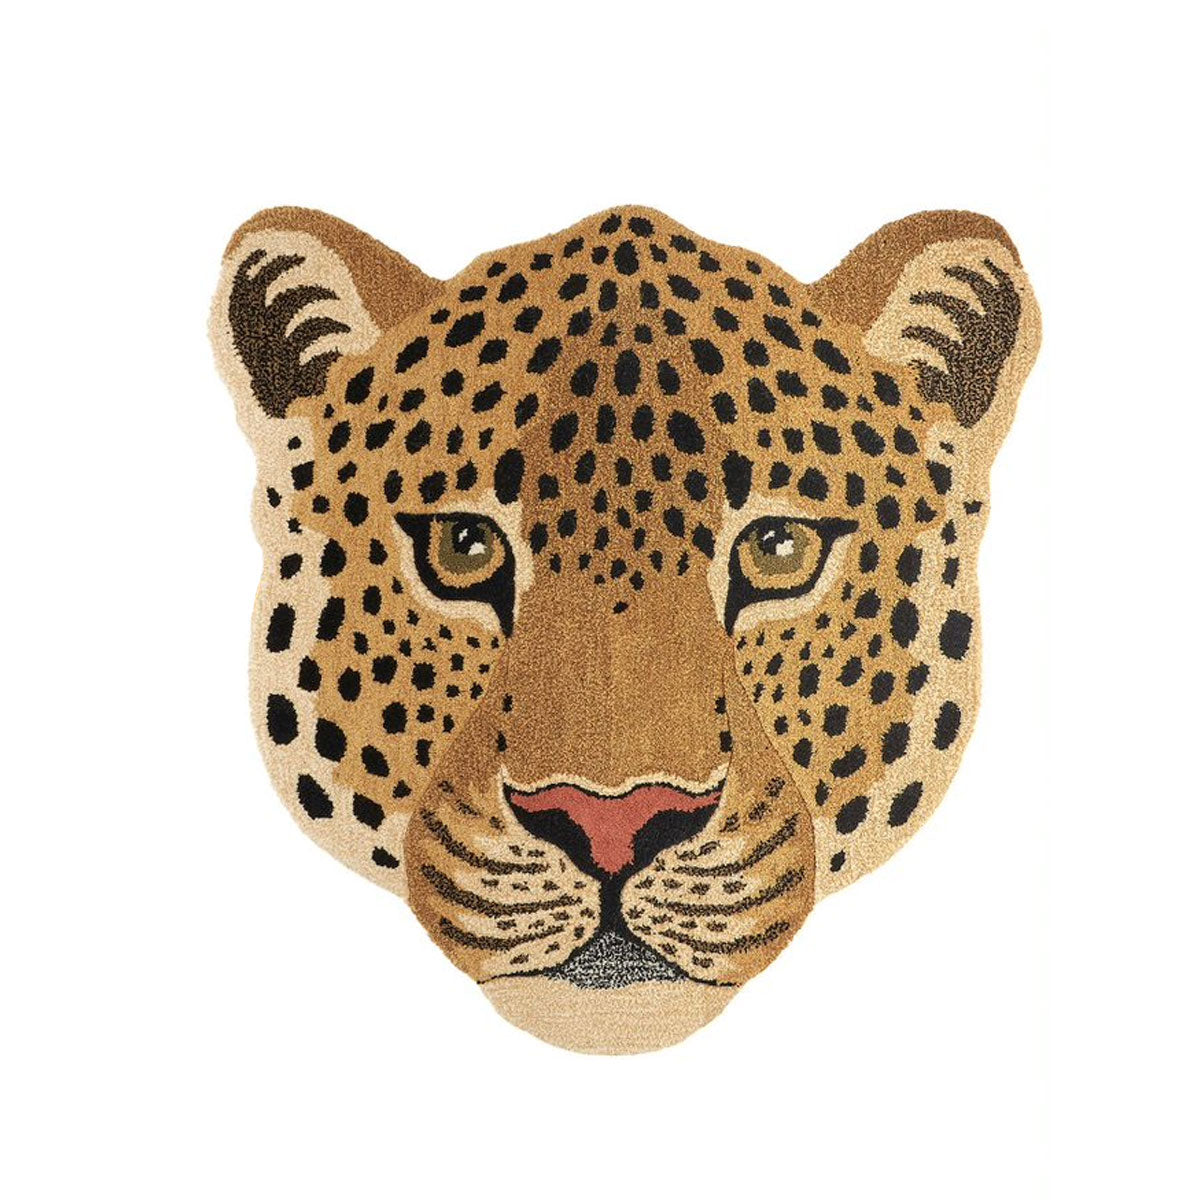 Loony Leopard Rug, Large